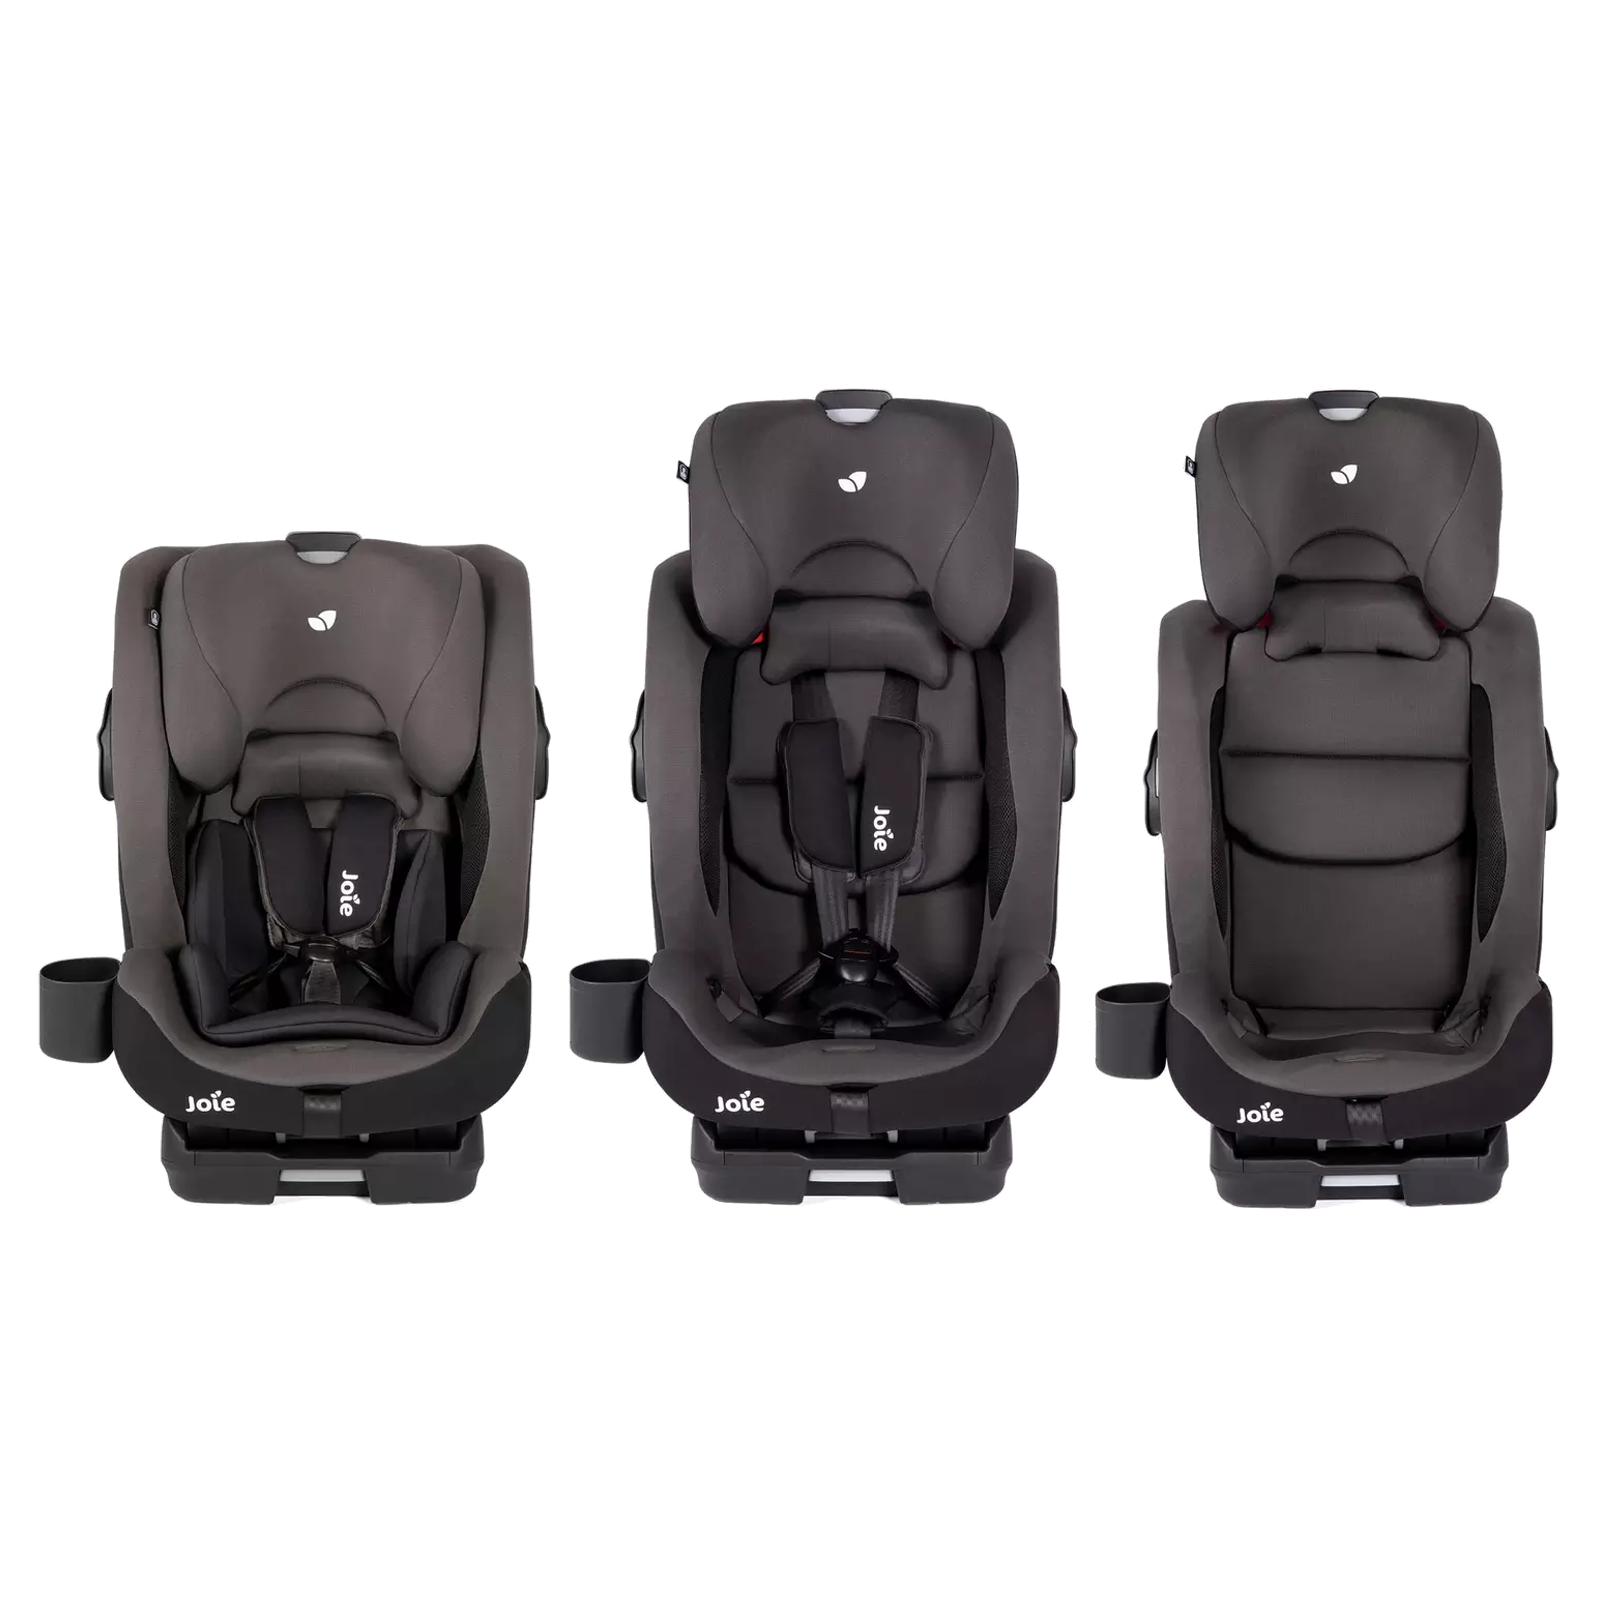 Joie Bold Group 1,2,3 ISOFIX Car Seat - Ember